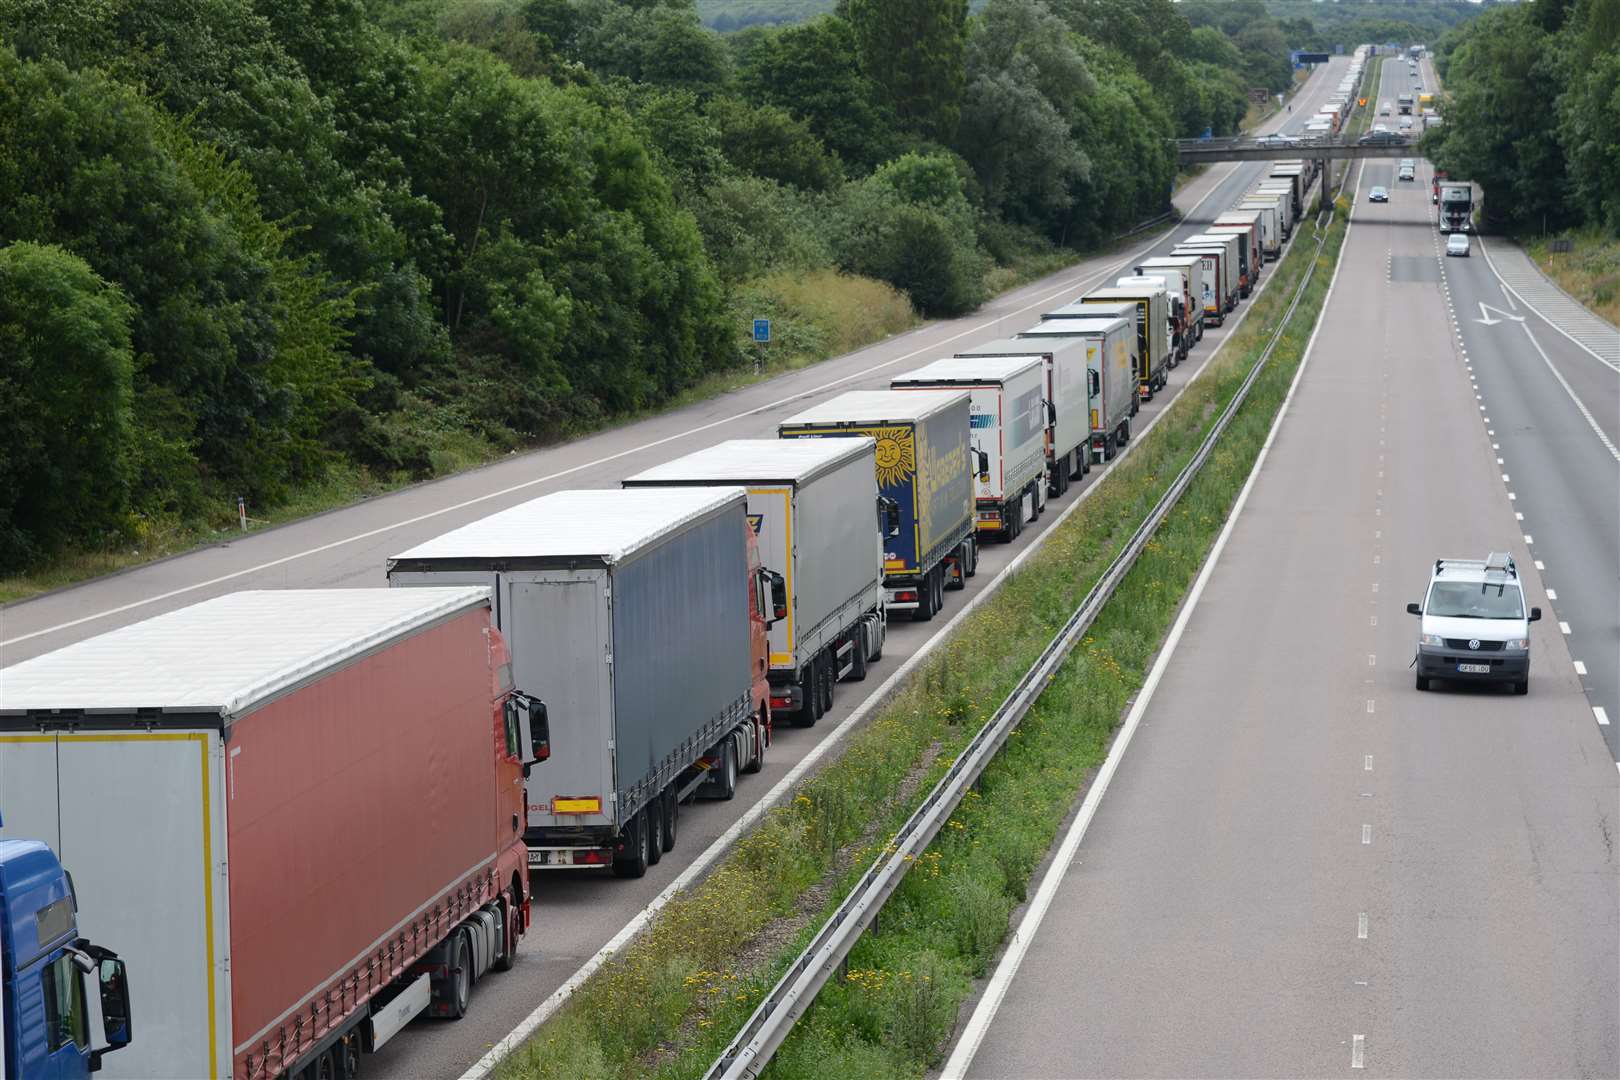 Lorries queing coast bound between junction 9 and junction 10 in Ashford during Operation Stack